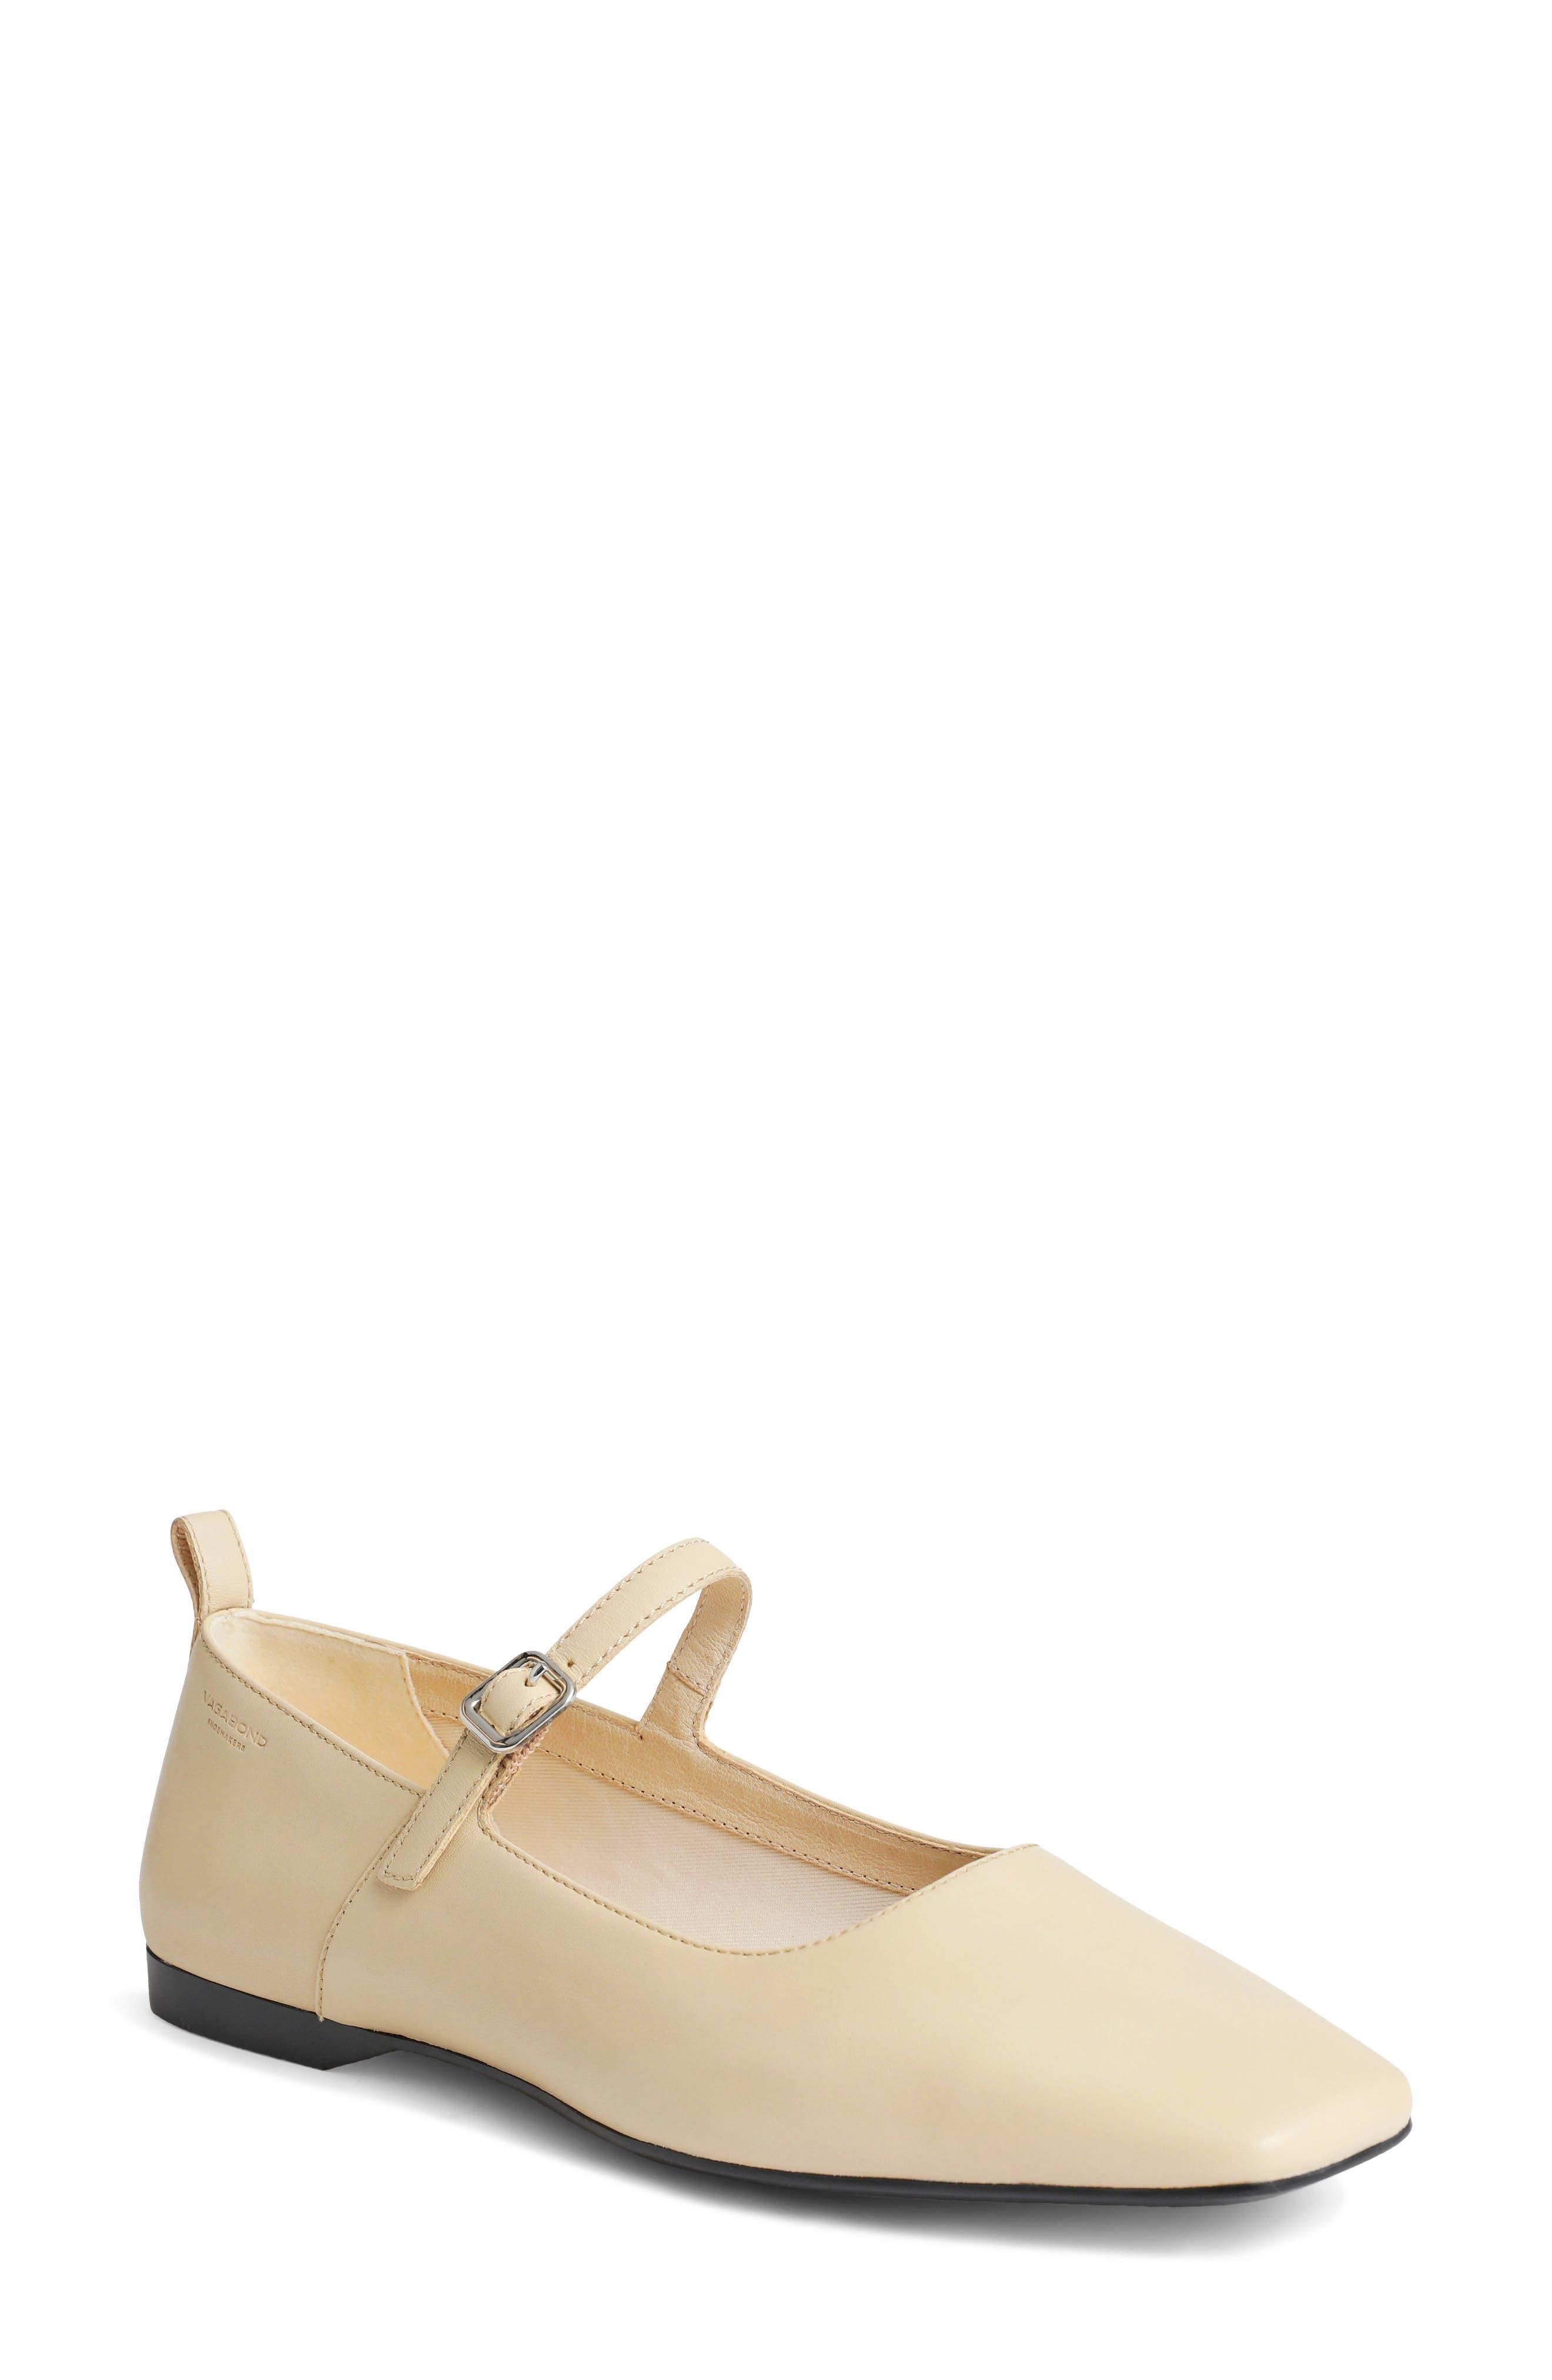 Vagabond Shoemakers Delia Mary Jane Flat in Natural | Lyst